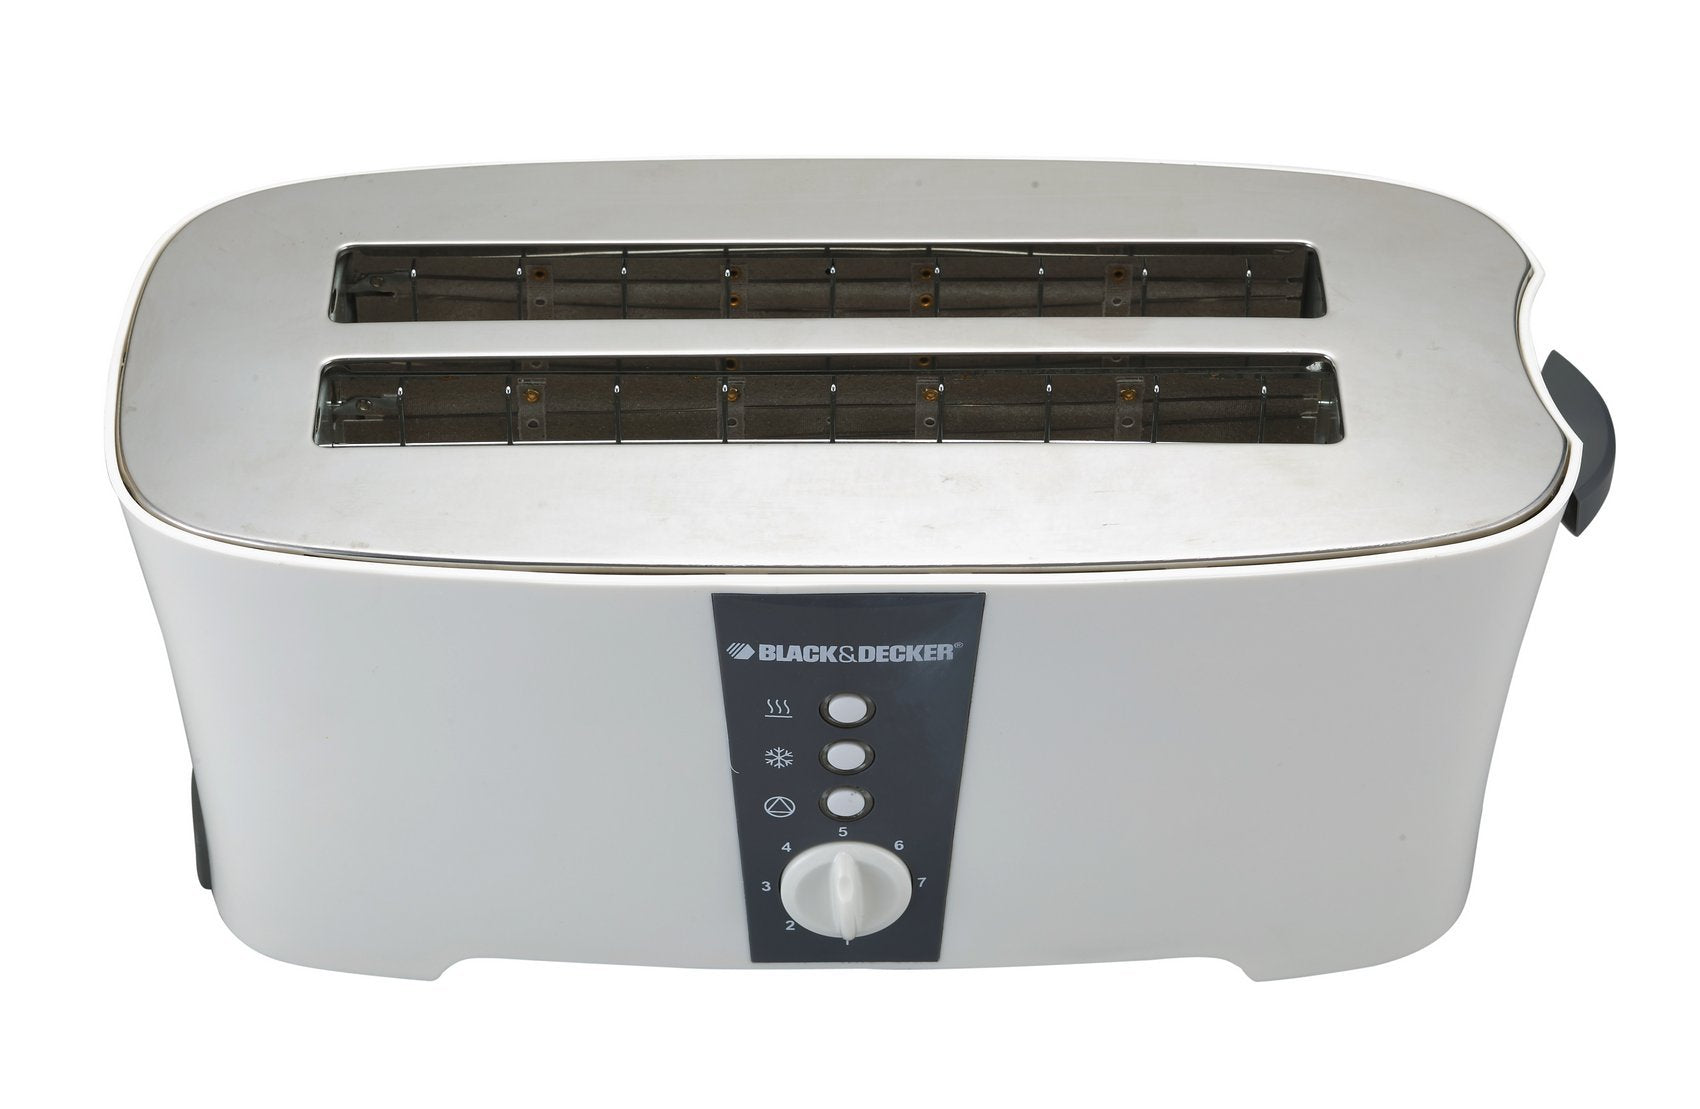 Black & Decker 1350W 4 Slice cool touch Toaster with Electronic Browning Control White